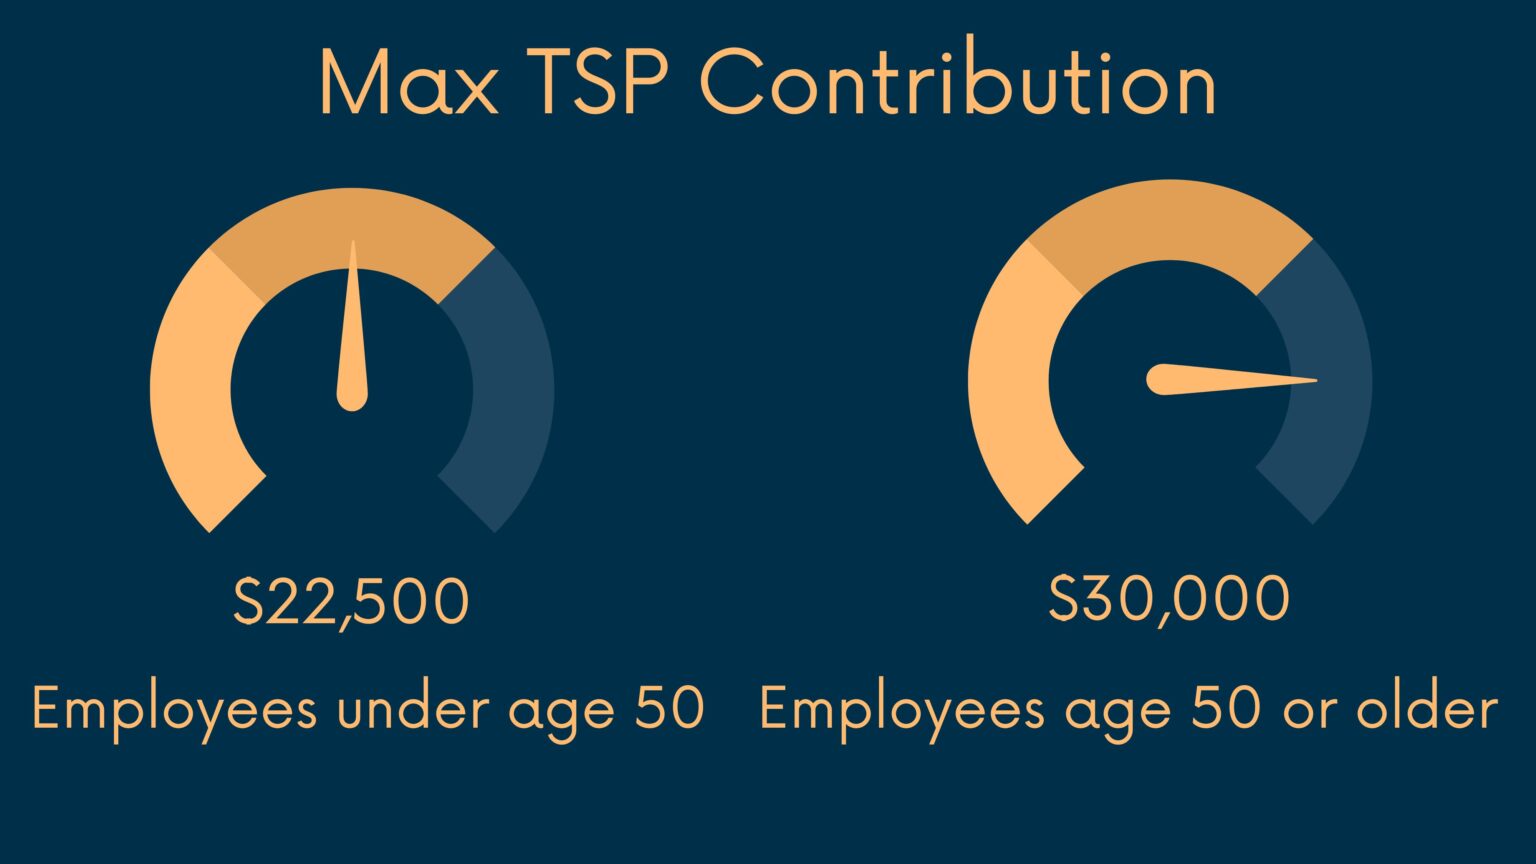 Are TSP catchup contributions worth it?